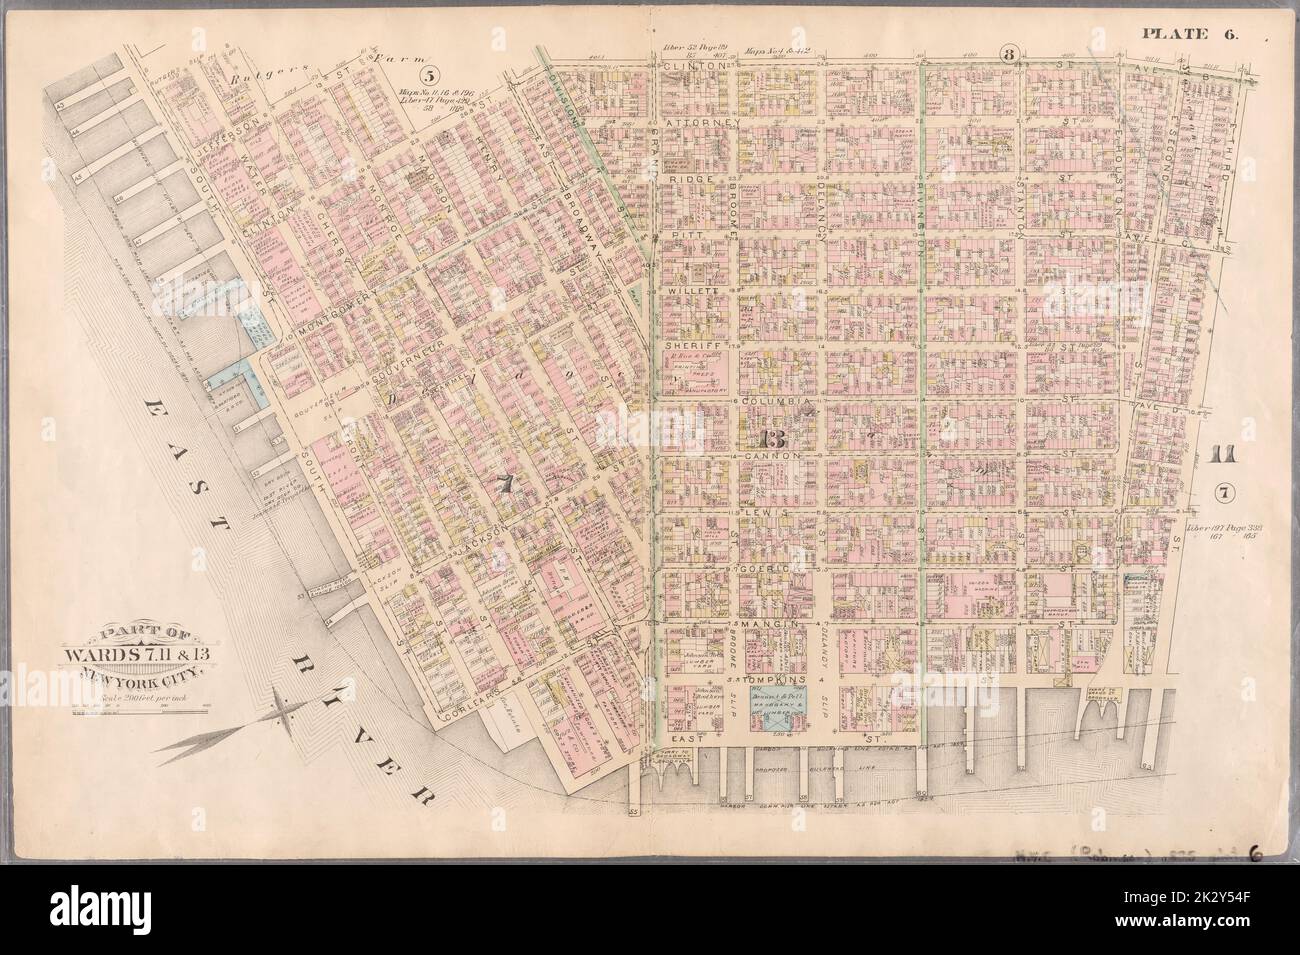 Cartographic, Maps. 1885. Lionel Pincus and Princess Firyal Map Division. Real property , New York (State) , New York, New York (N.Y.) Plate 6: Bounded by Rutgers Slip, Cherry Street, Jefferson Street, Madison Street, Clinton Street, E. Third Street, Tompkins Street, Rivington Street, East Street, Water Street, Corlears Street, and (East River, Piers 43-54) South Street. Part of Wards 7, 11 & 13, New York City. Stock Photo